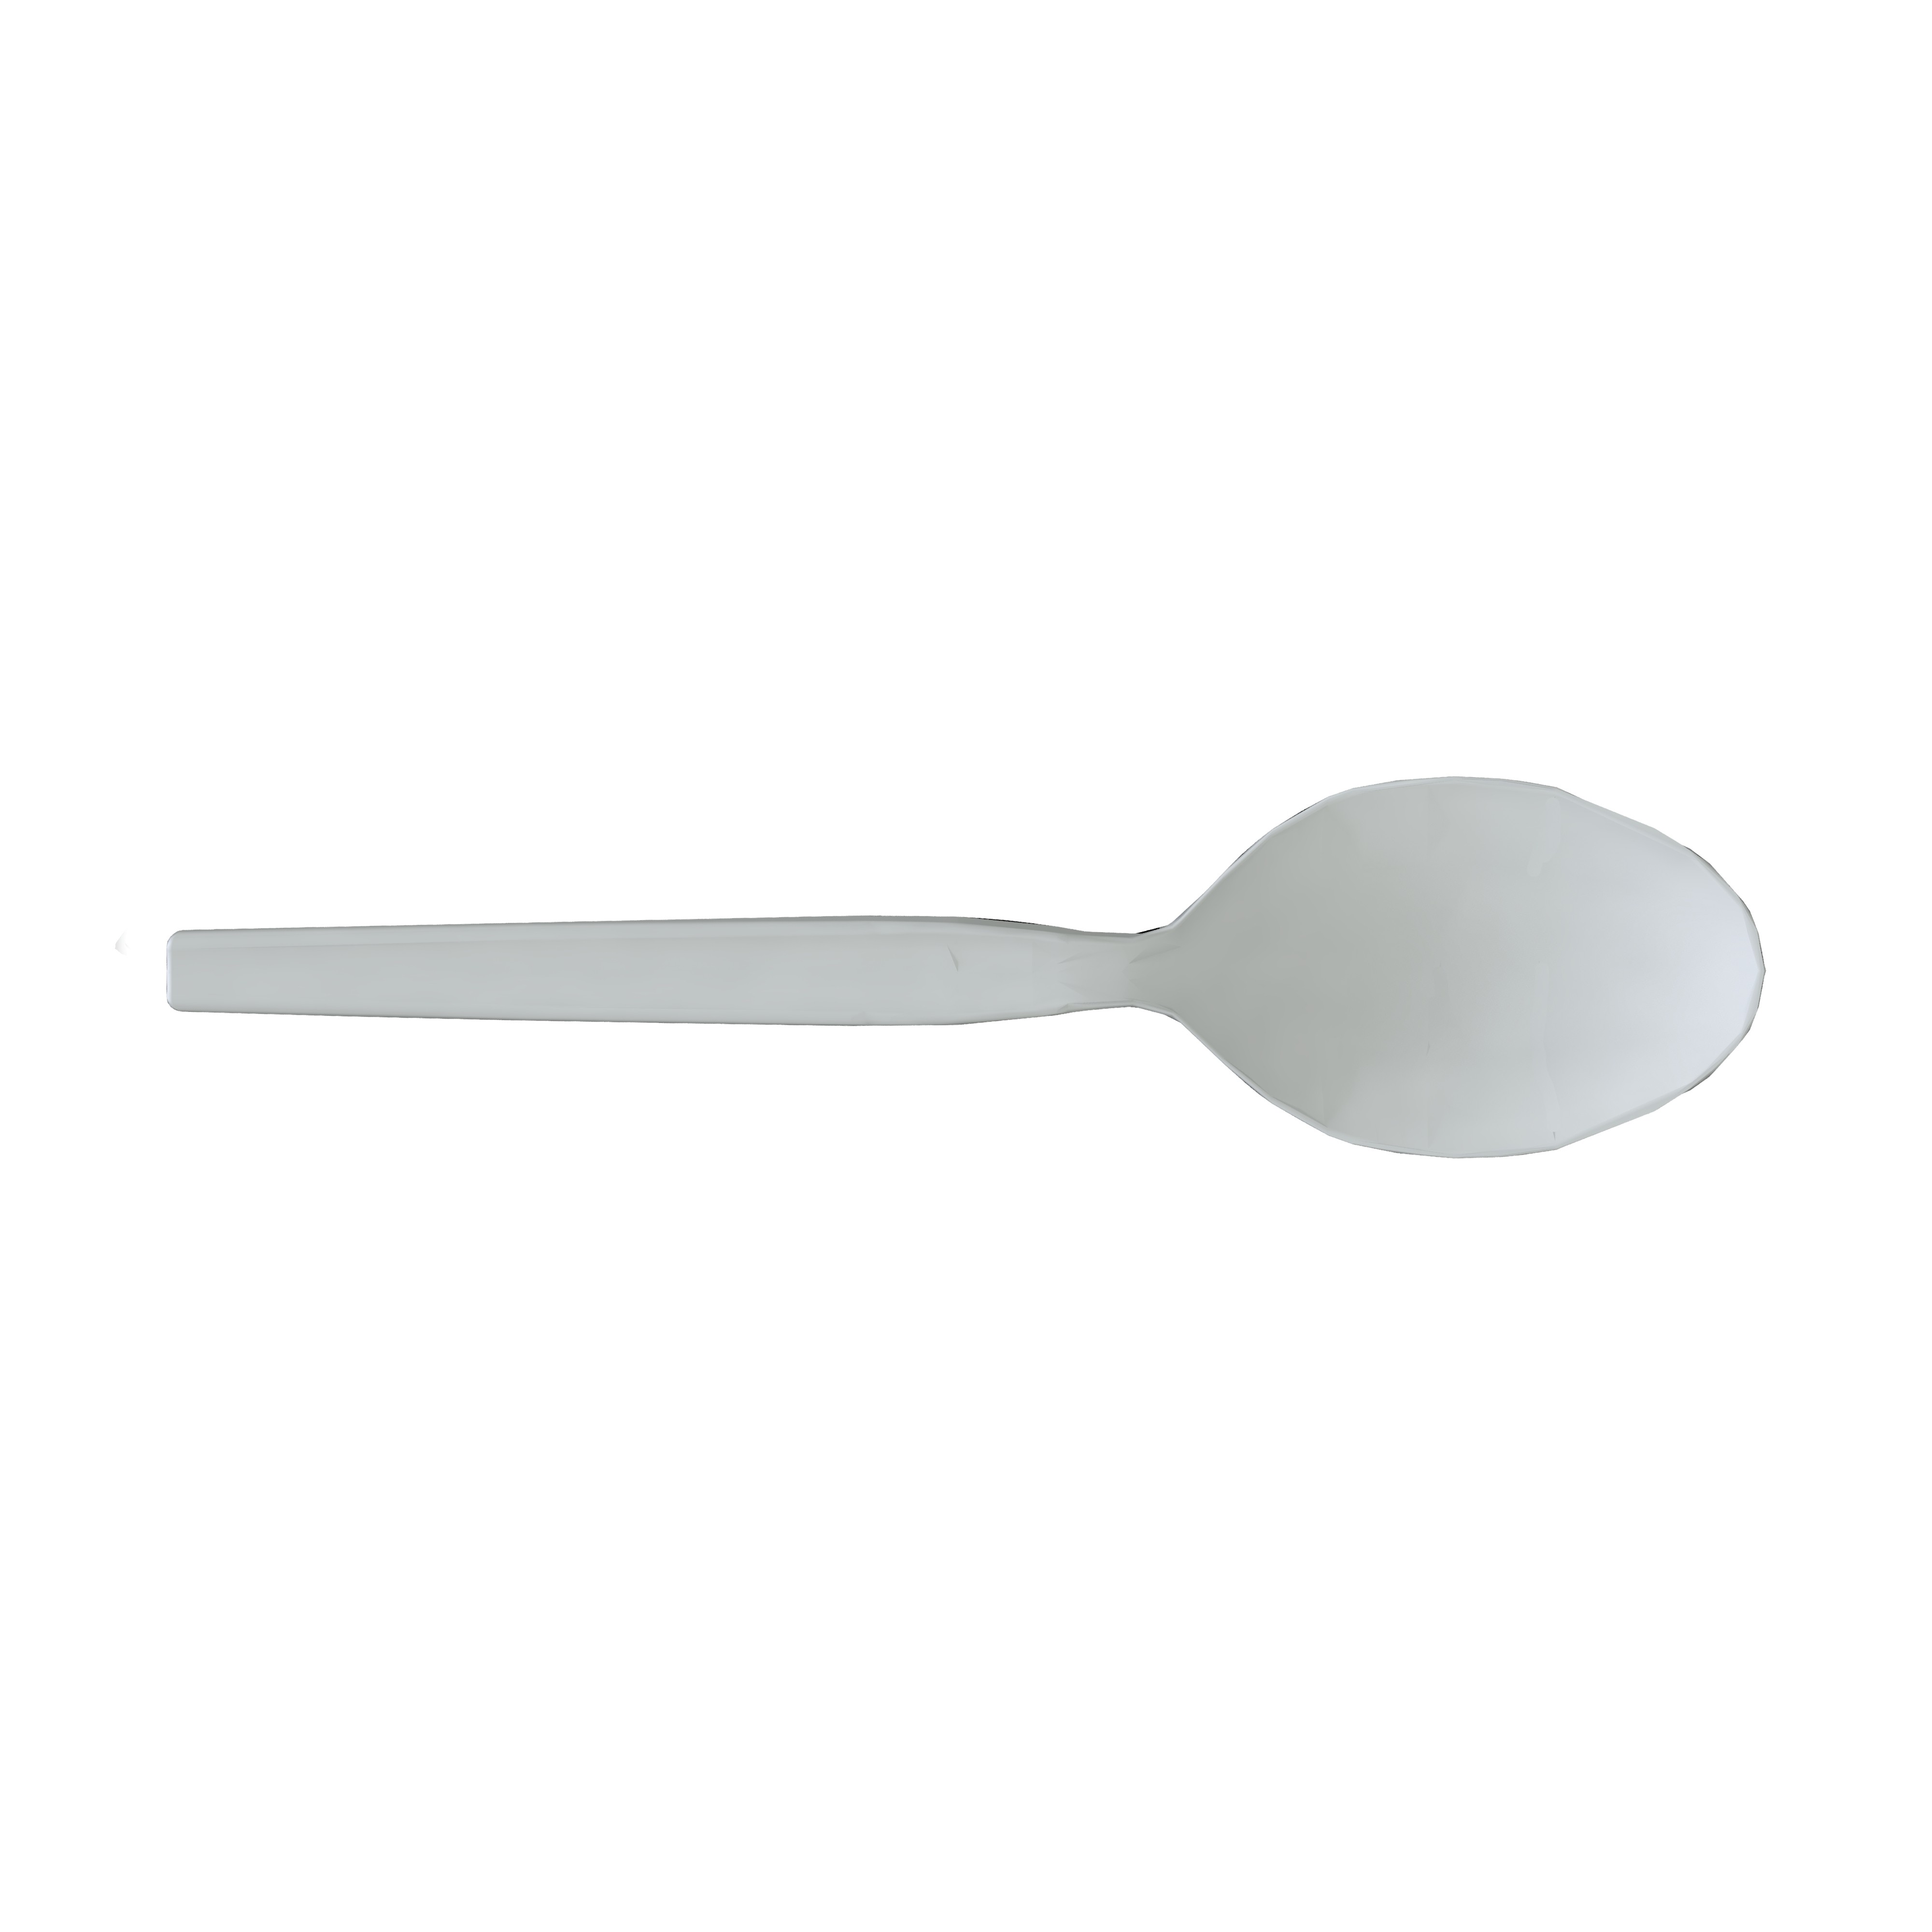 SM160-W Table Spoon, Medium Weight 160mm White - Case of 2,000